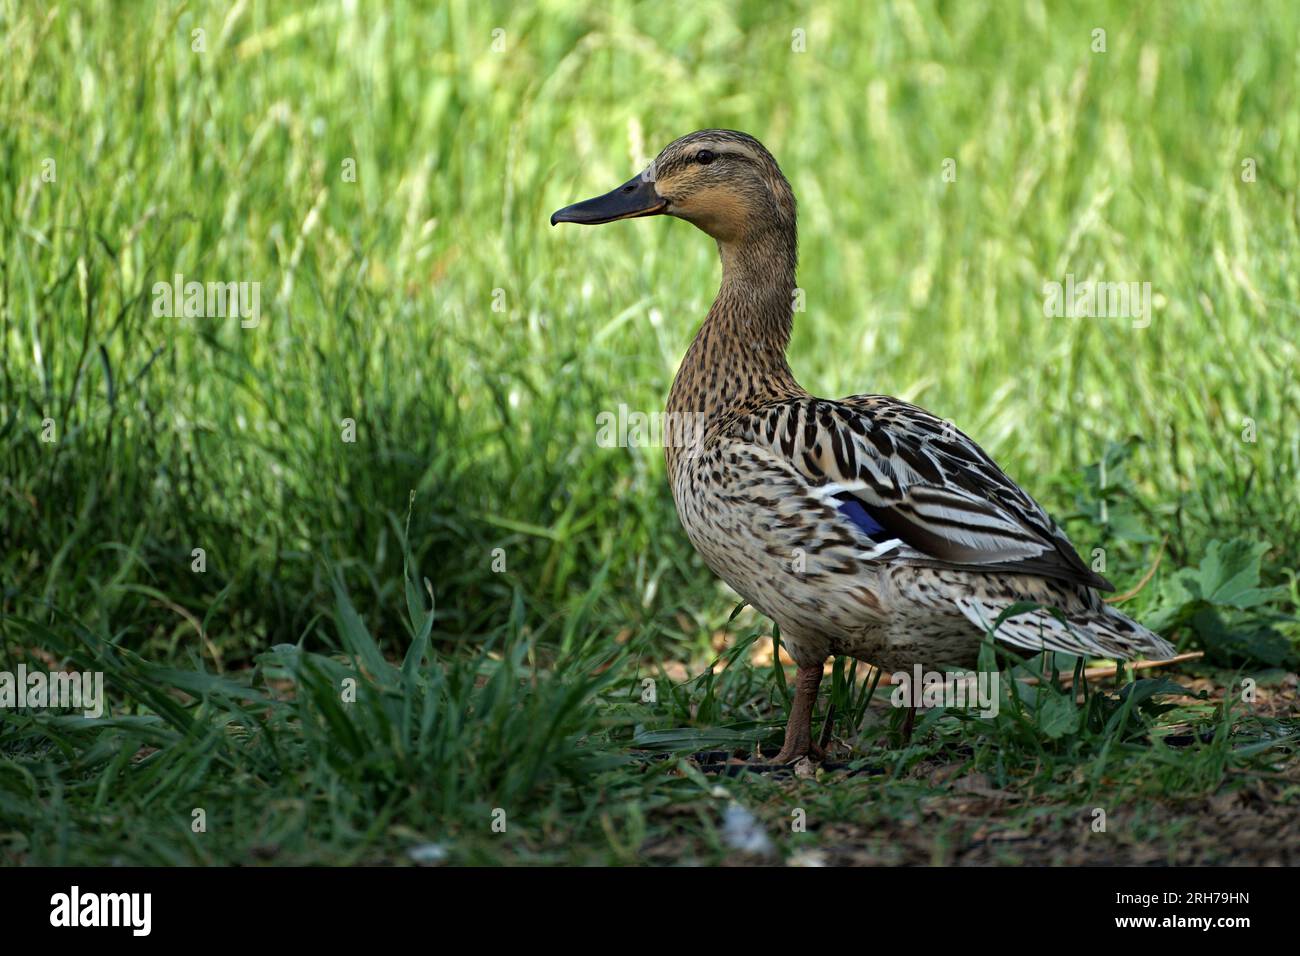 Amazing closeup view of brown mallard female duck with green grass at background. Stock Photo